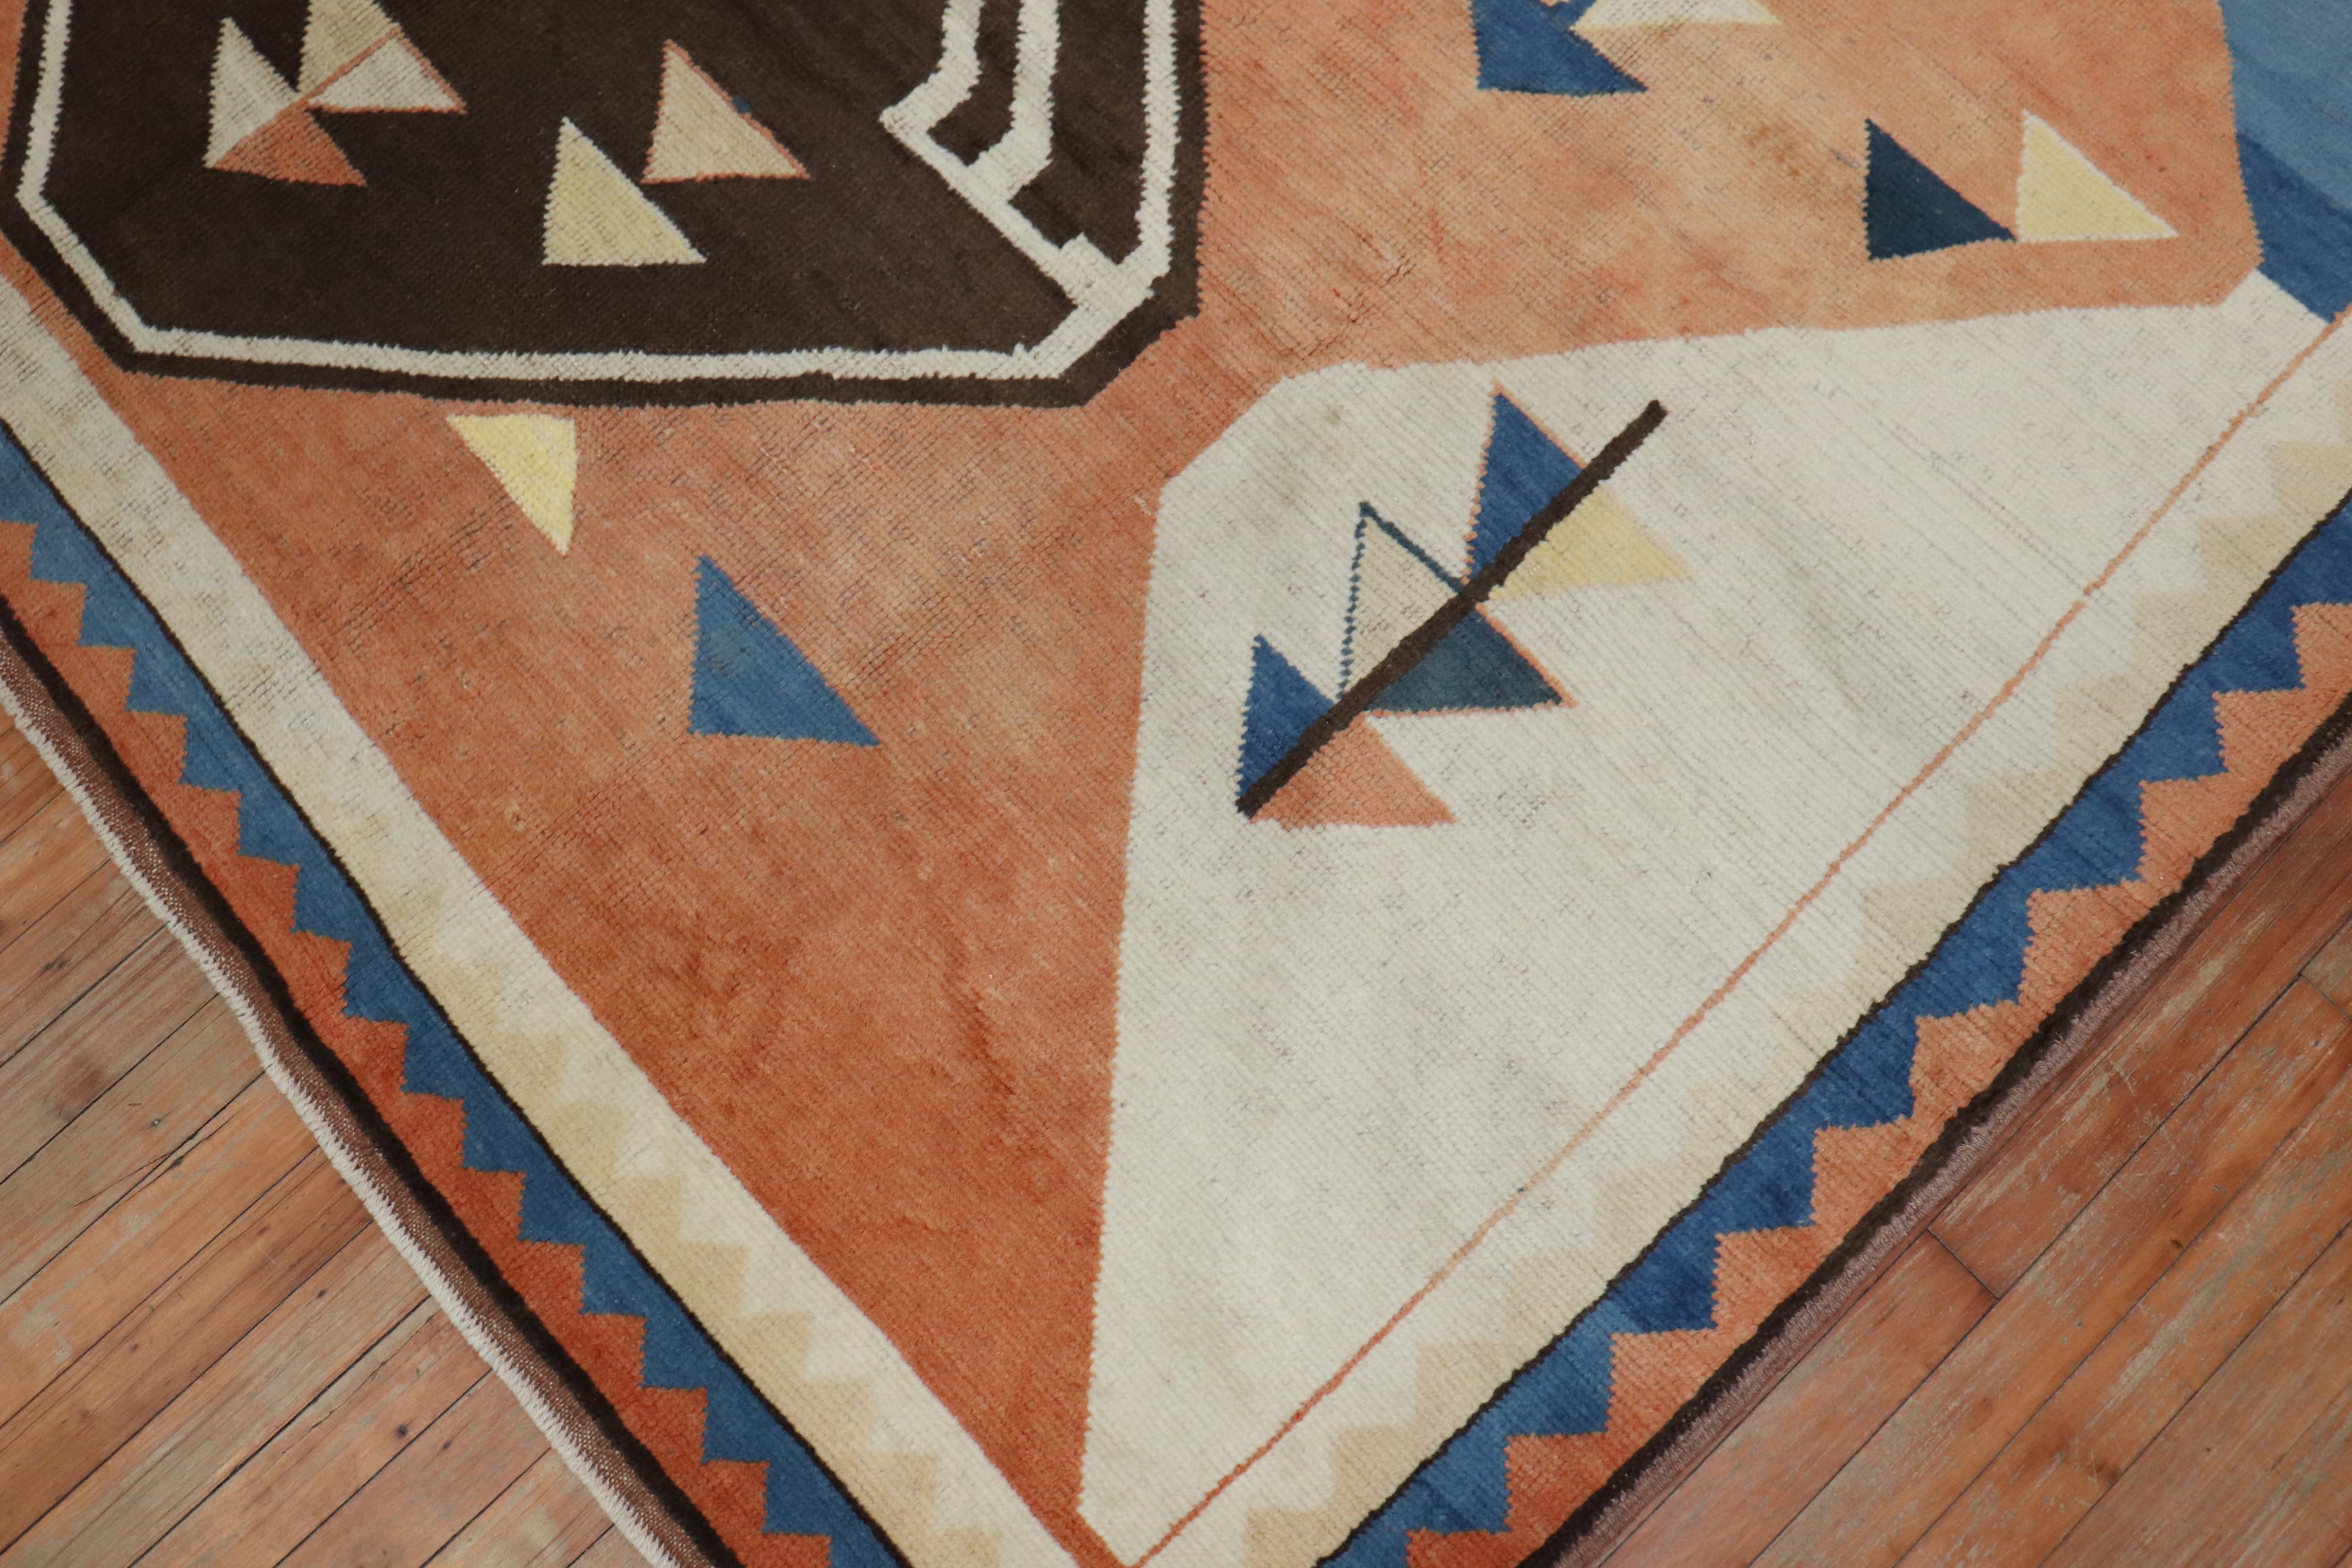 A one of a kind mid-20th century primitive and abstract Turkish deco rug inspired by rugs from the gabbeh tribe in Northwest Persian. Large scale bold geometric medallions hover over a peach ground. Blue, brown and ivory accents,

circa third